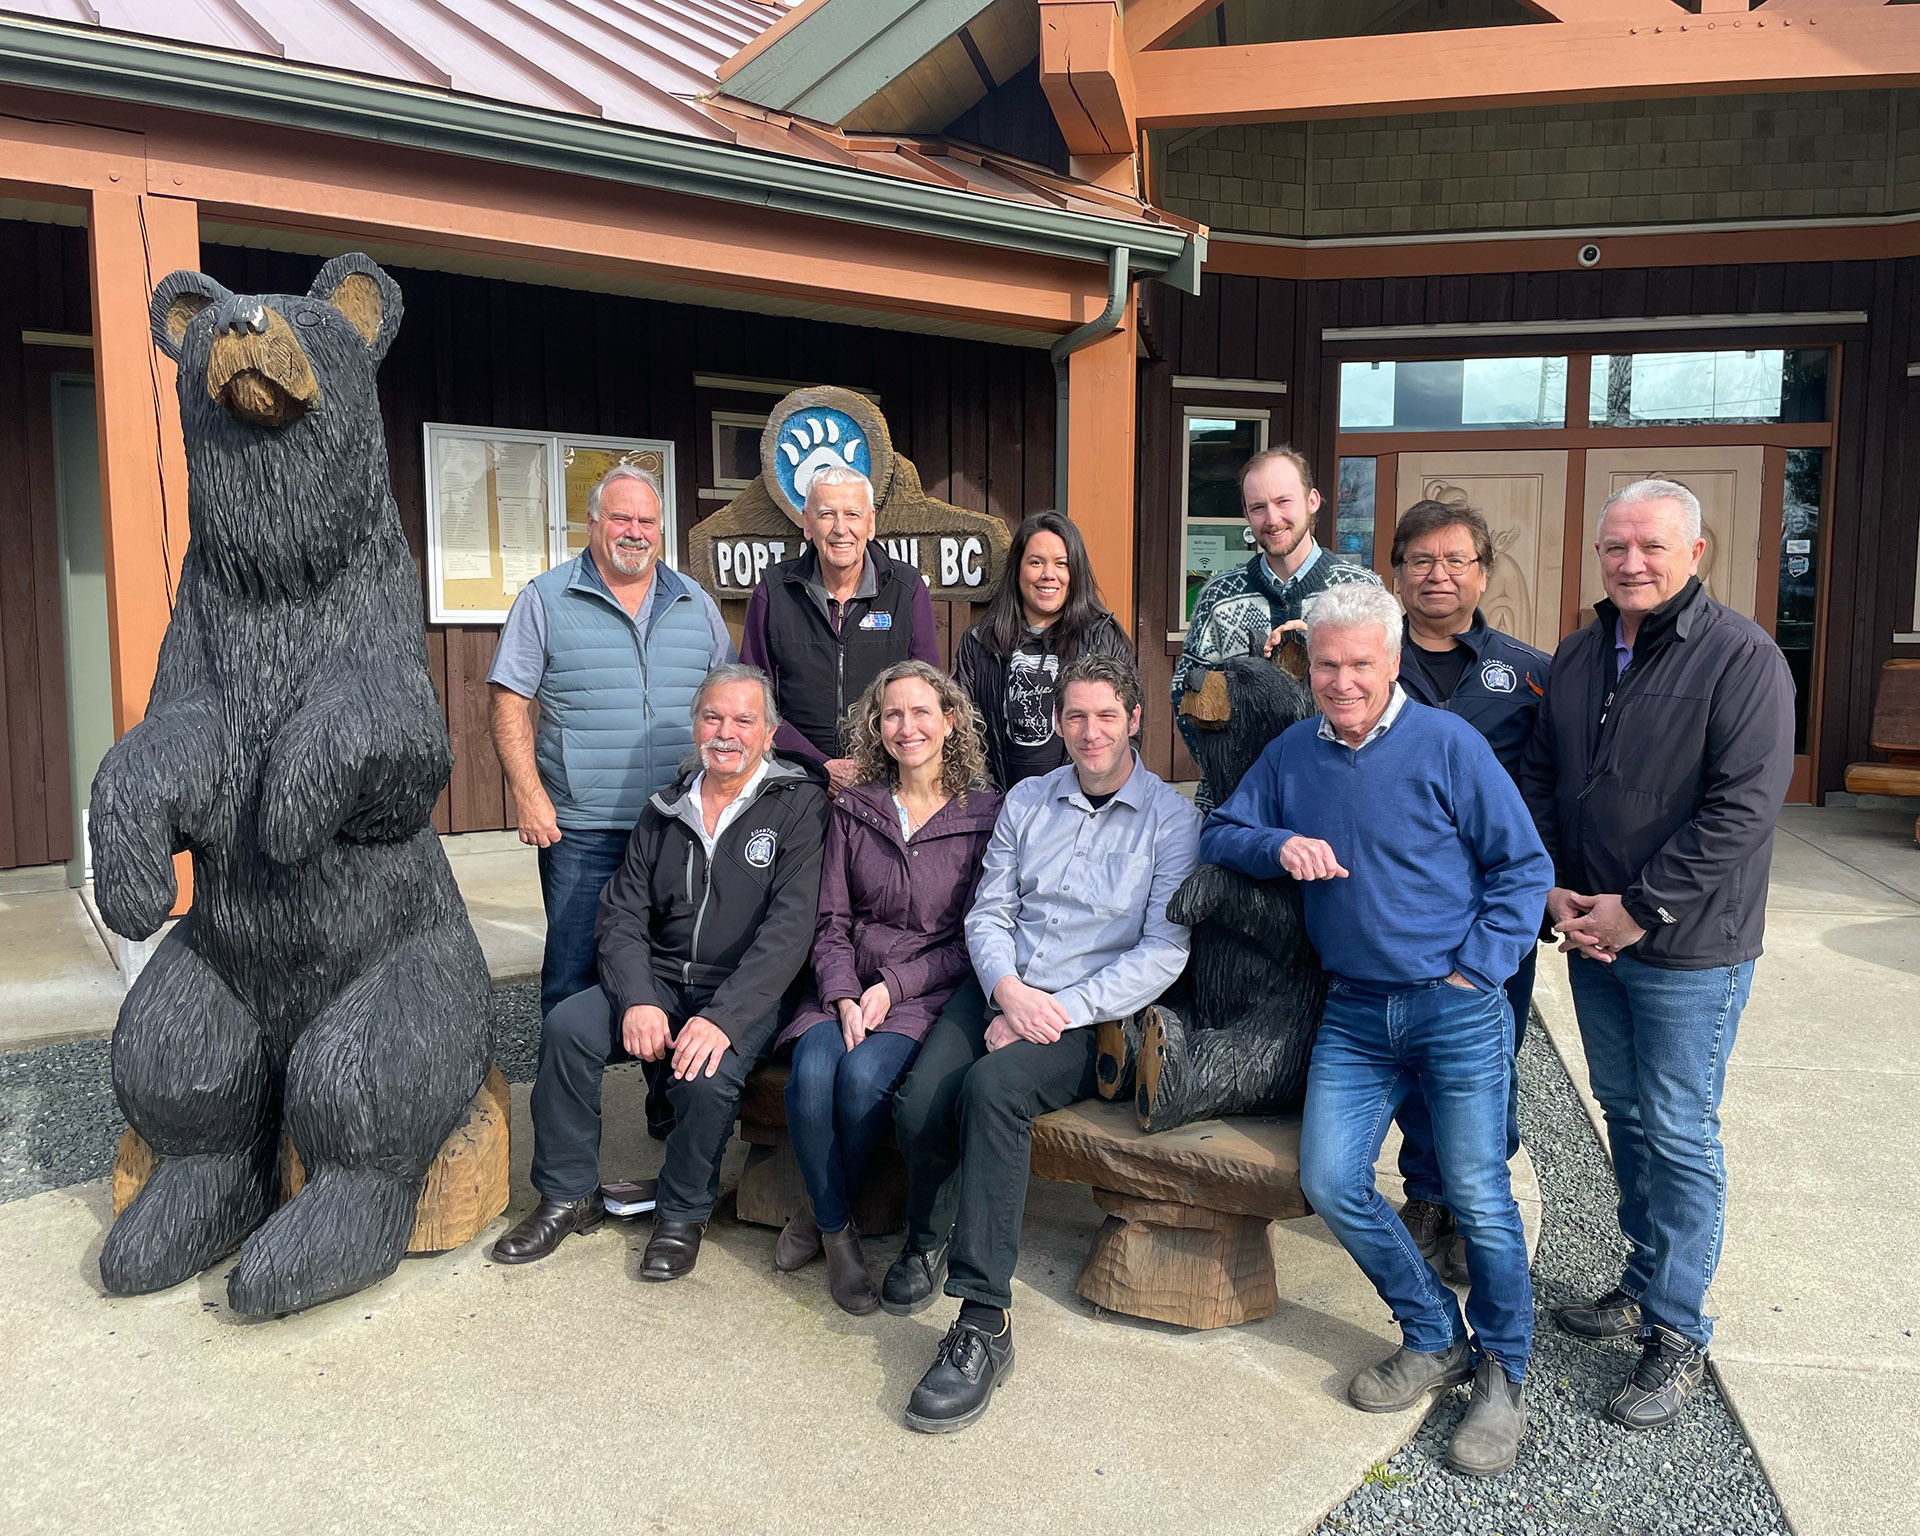 The 10-person team leading the redevelopment of the Alberni Pacific Railway pose together in front of the Port Alberni Visitor Centre